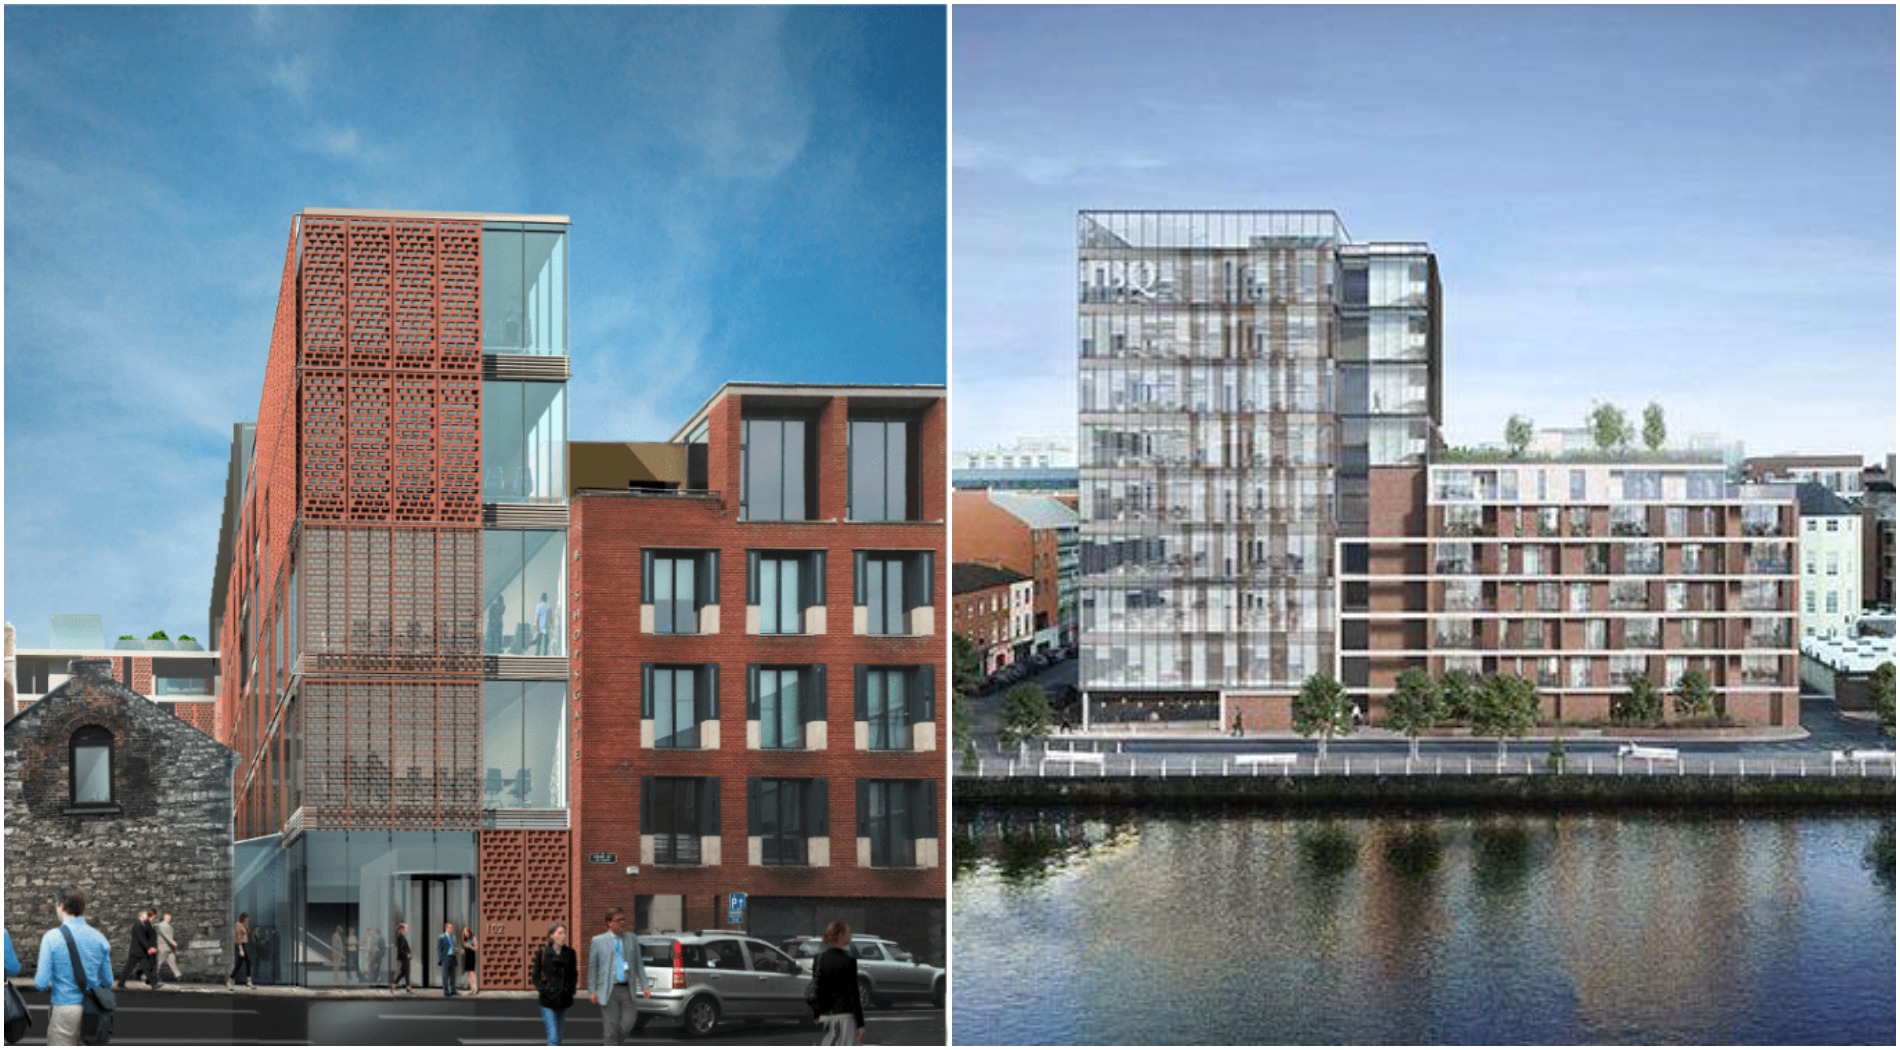 80 million euro development 1BQ - Above is an artist rendition of what the entrance of the building from Henry Street and the back of the building on Bishop’s Quay will look like upon completion